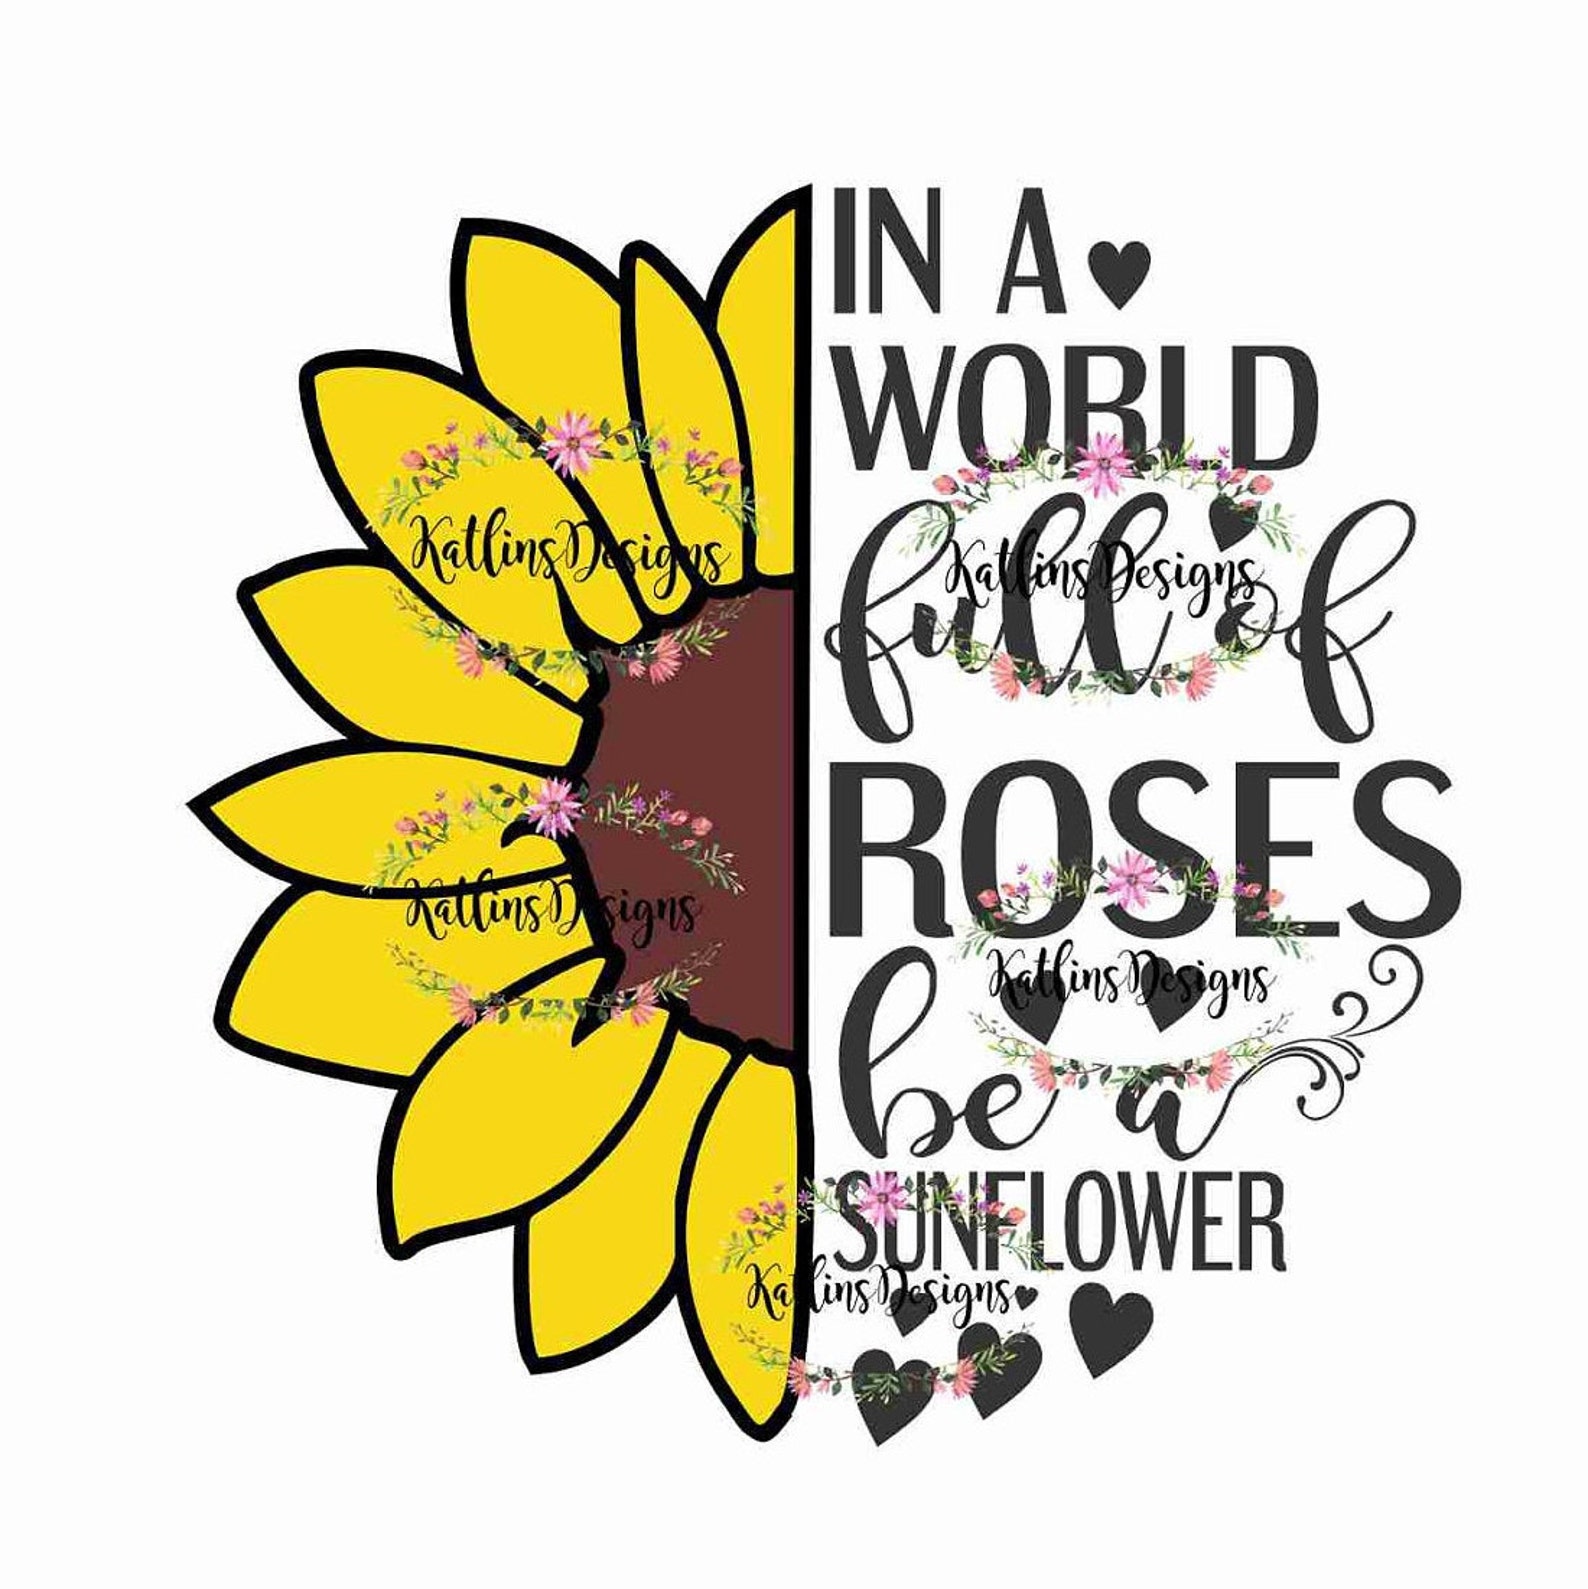 In a world full of roses be a sunflower SVG Cut file imag...